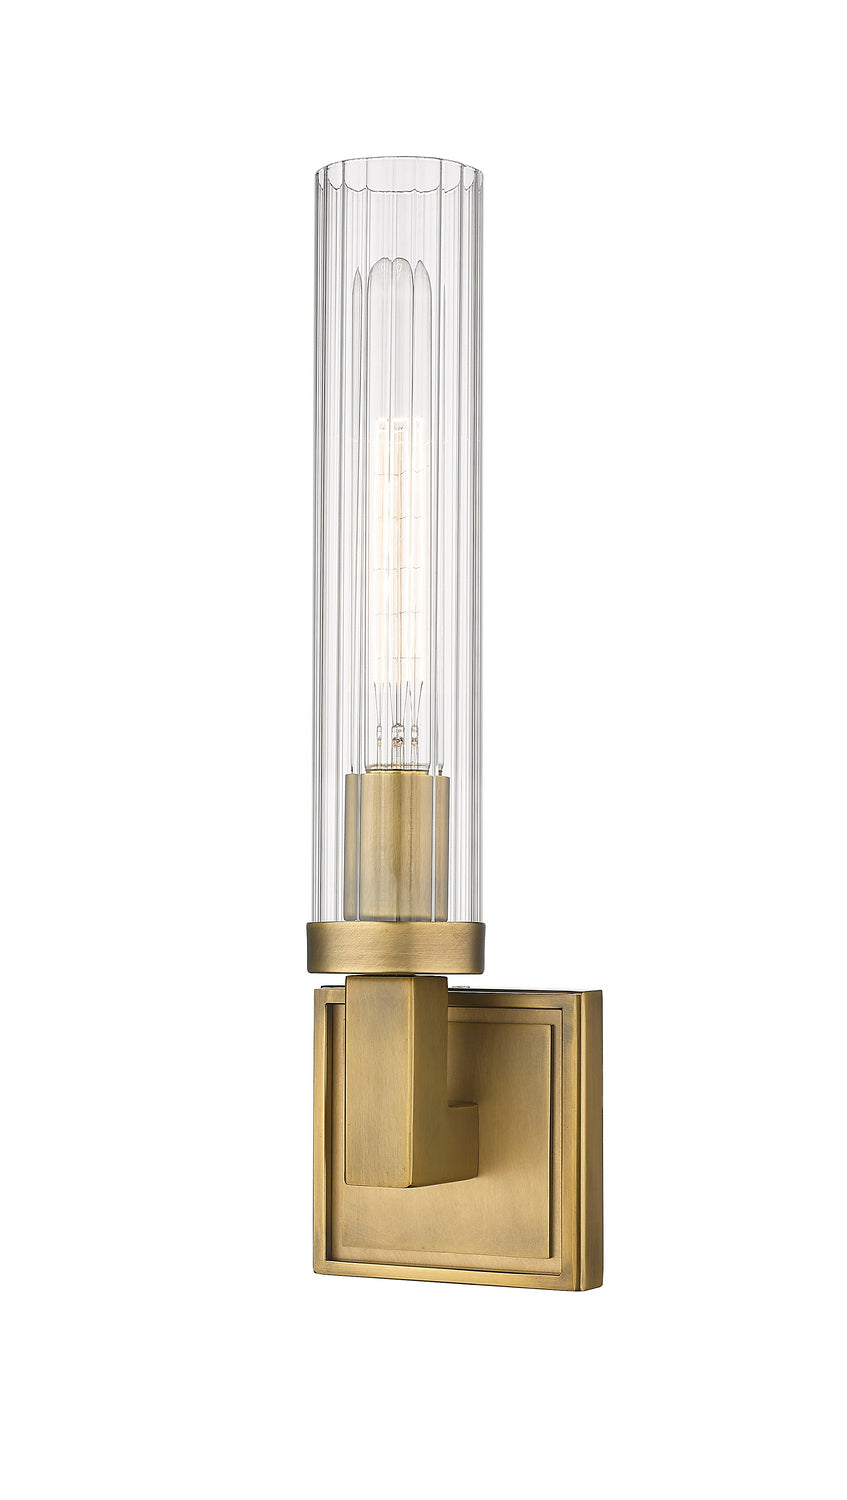 Z-Lite Canada - One Light Wall Sconce - Beau - Rubbed Brass- Union Lighting Luminaires Decor